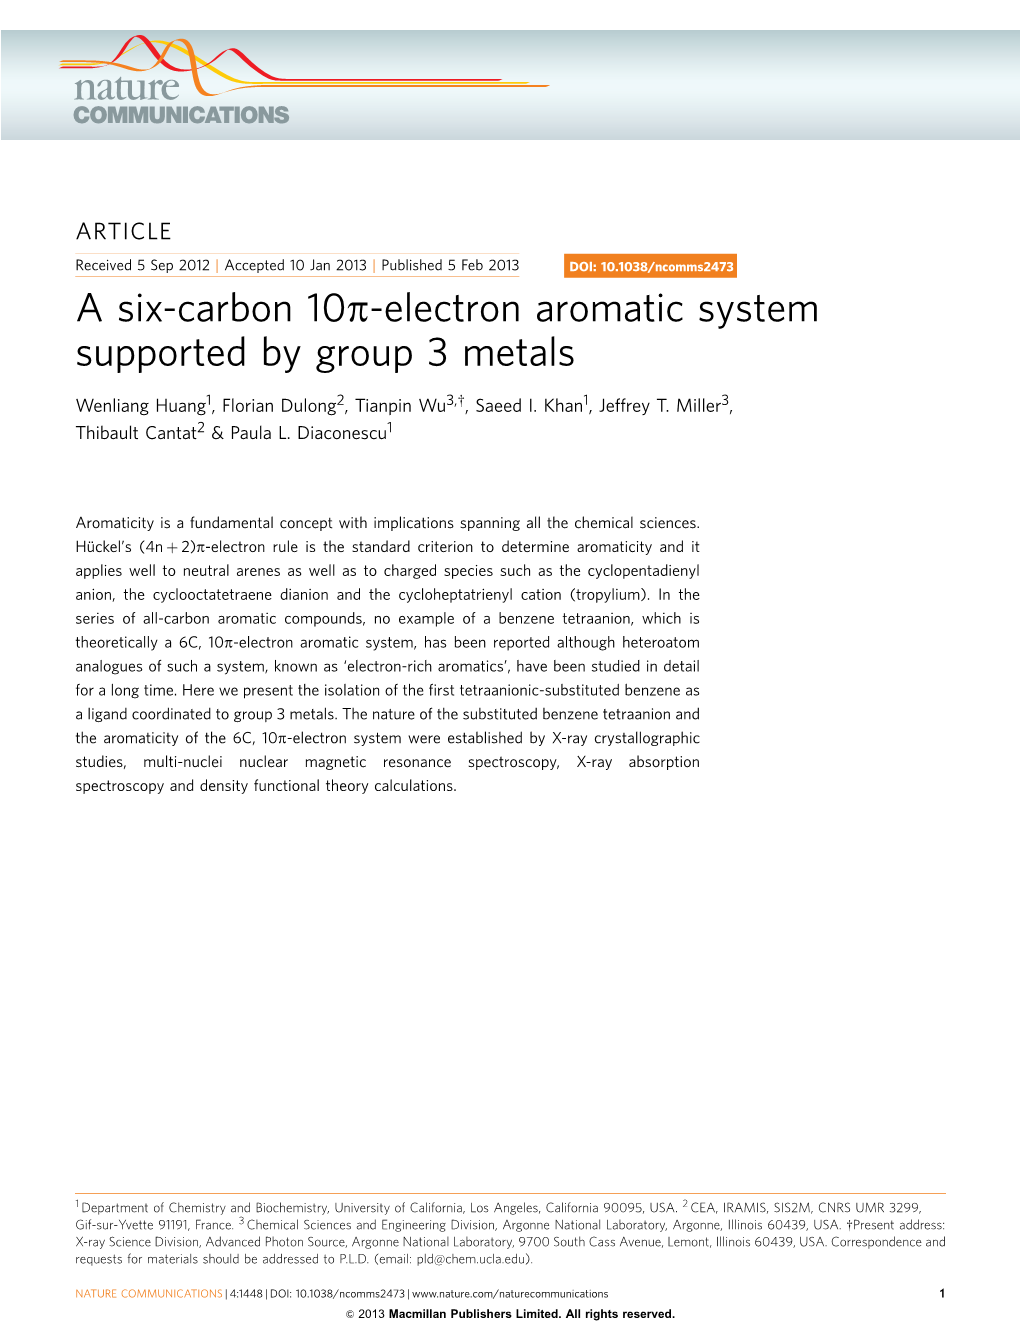 A Six-Carbon 10&Pi;-Electron Aromatic System Supported by Group 3 Metals